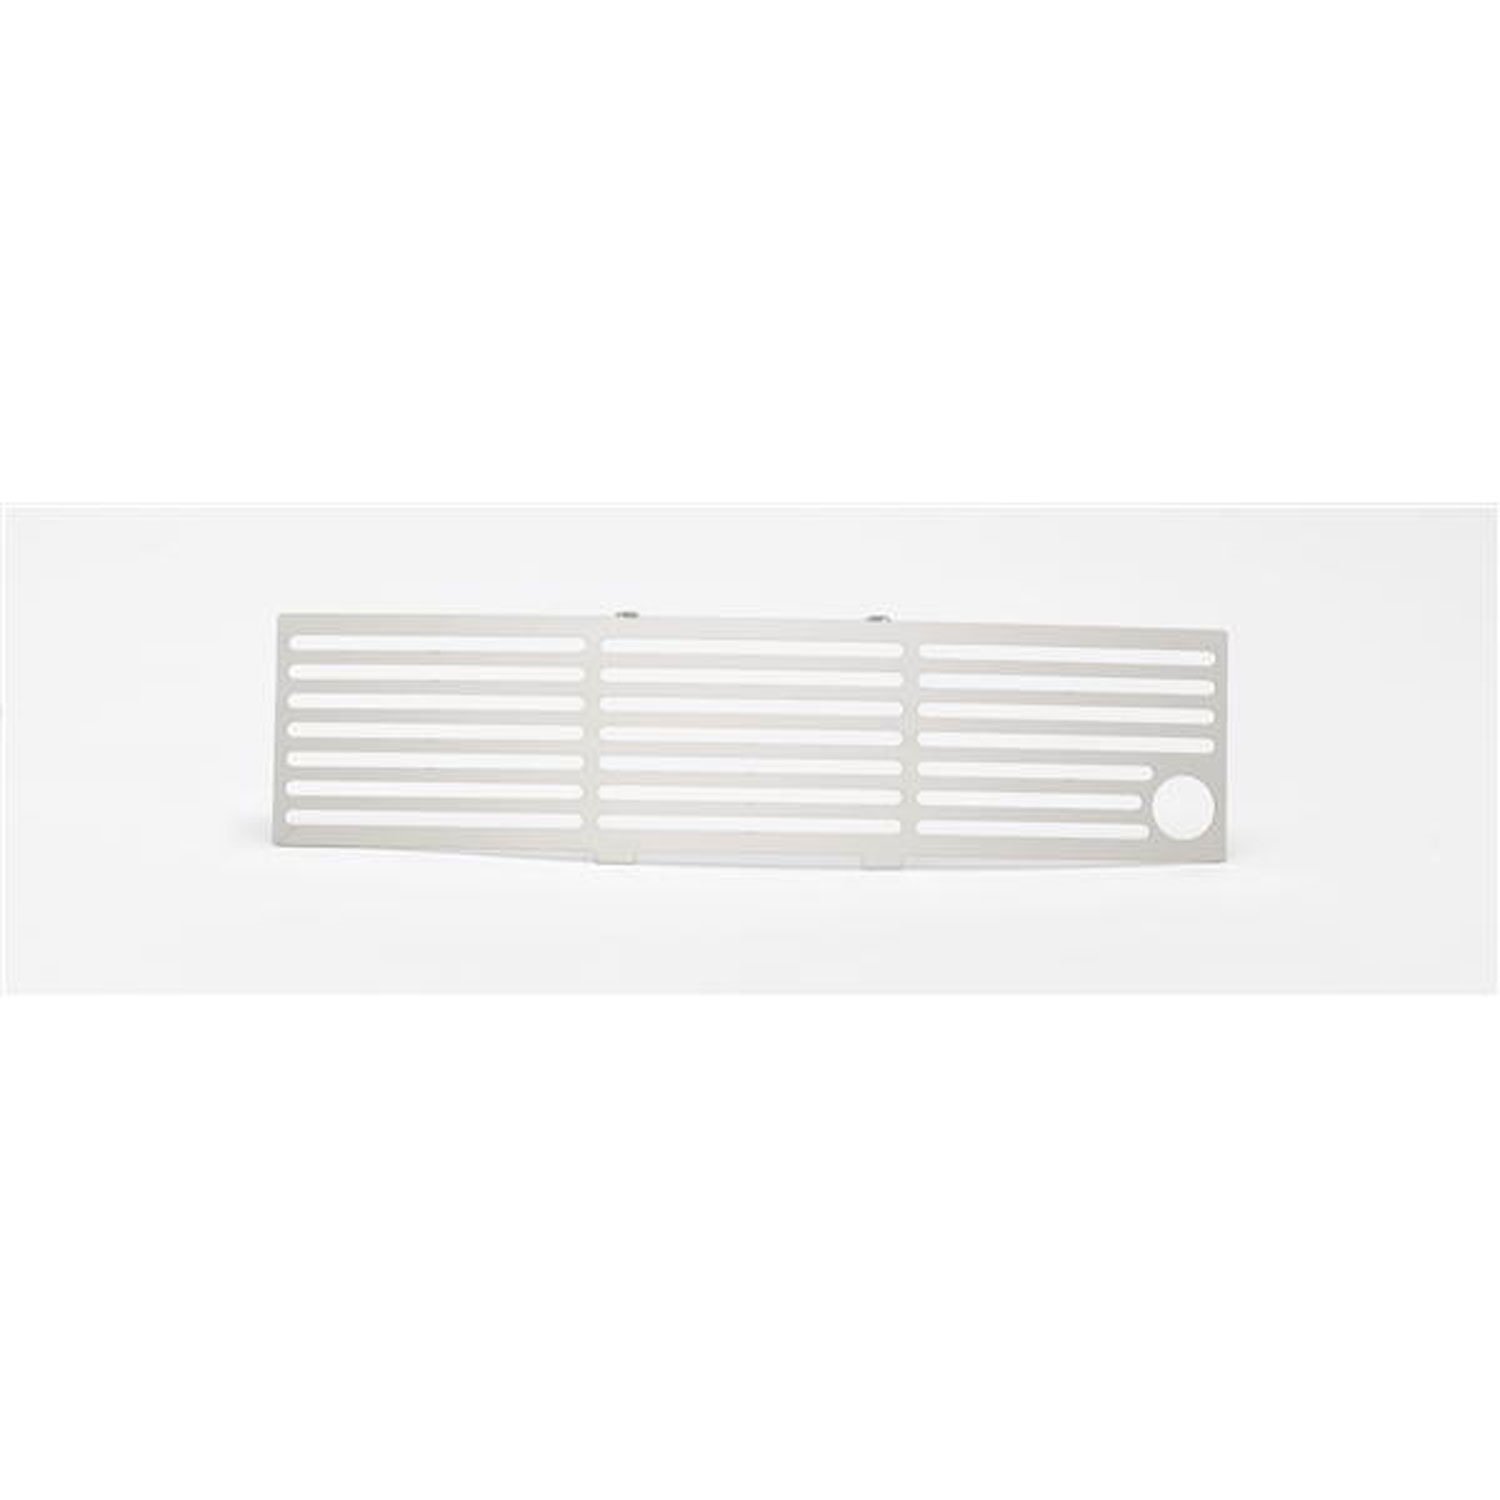 Bumper Grille Insert 2011-14 Ford F150 EcoBoost